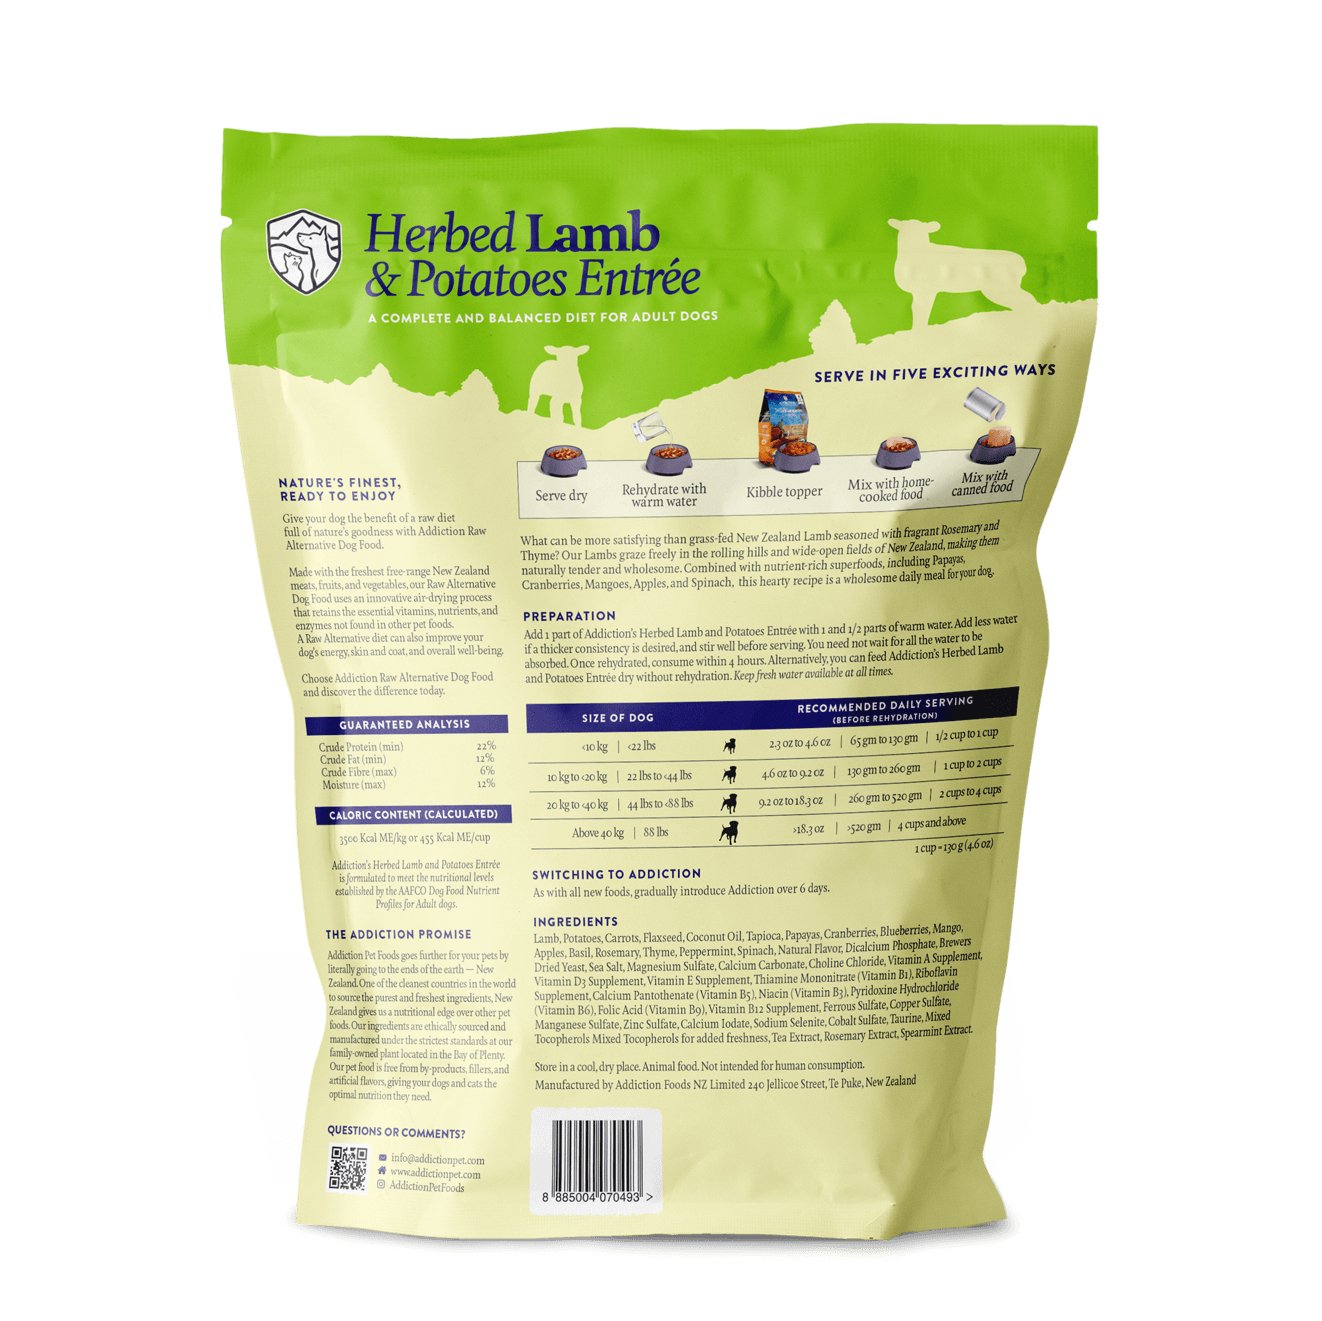 Addiction Herbed Lamb & Potatoes, Compete & Balanced, Limited Ingredients Raw Alternative Dog Food - Tuck In Healthy Pet Food & Animal Natural Health Supplies